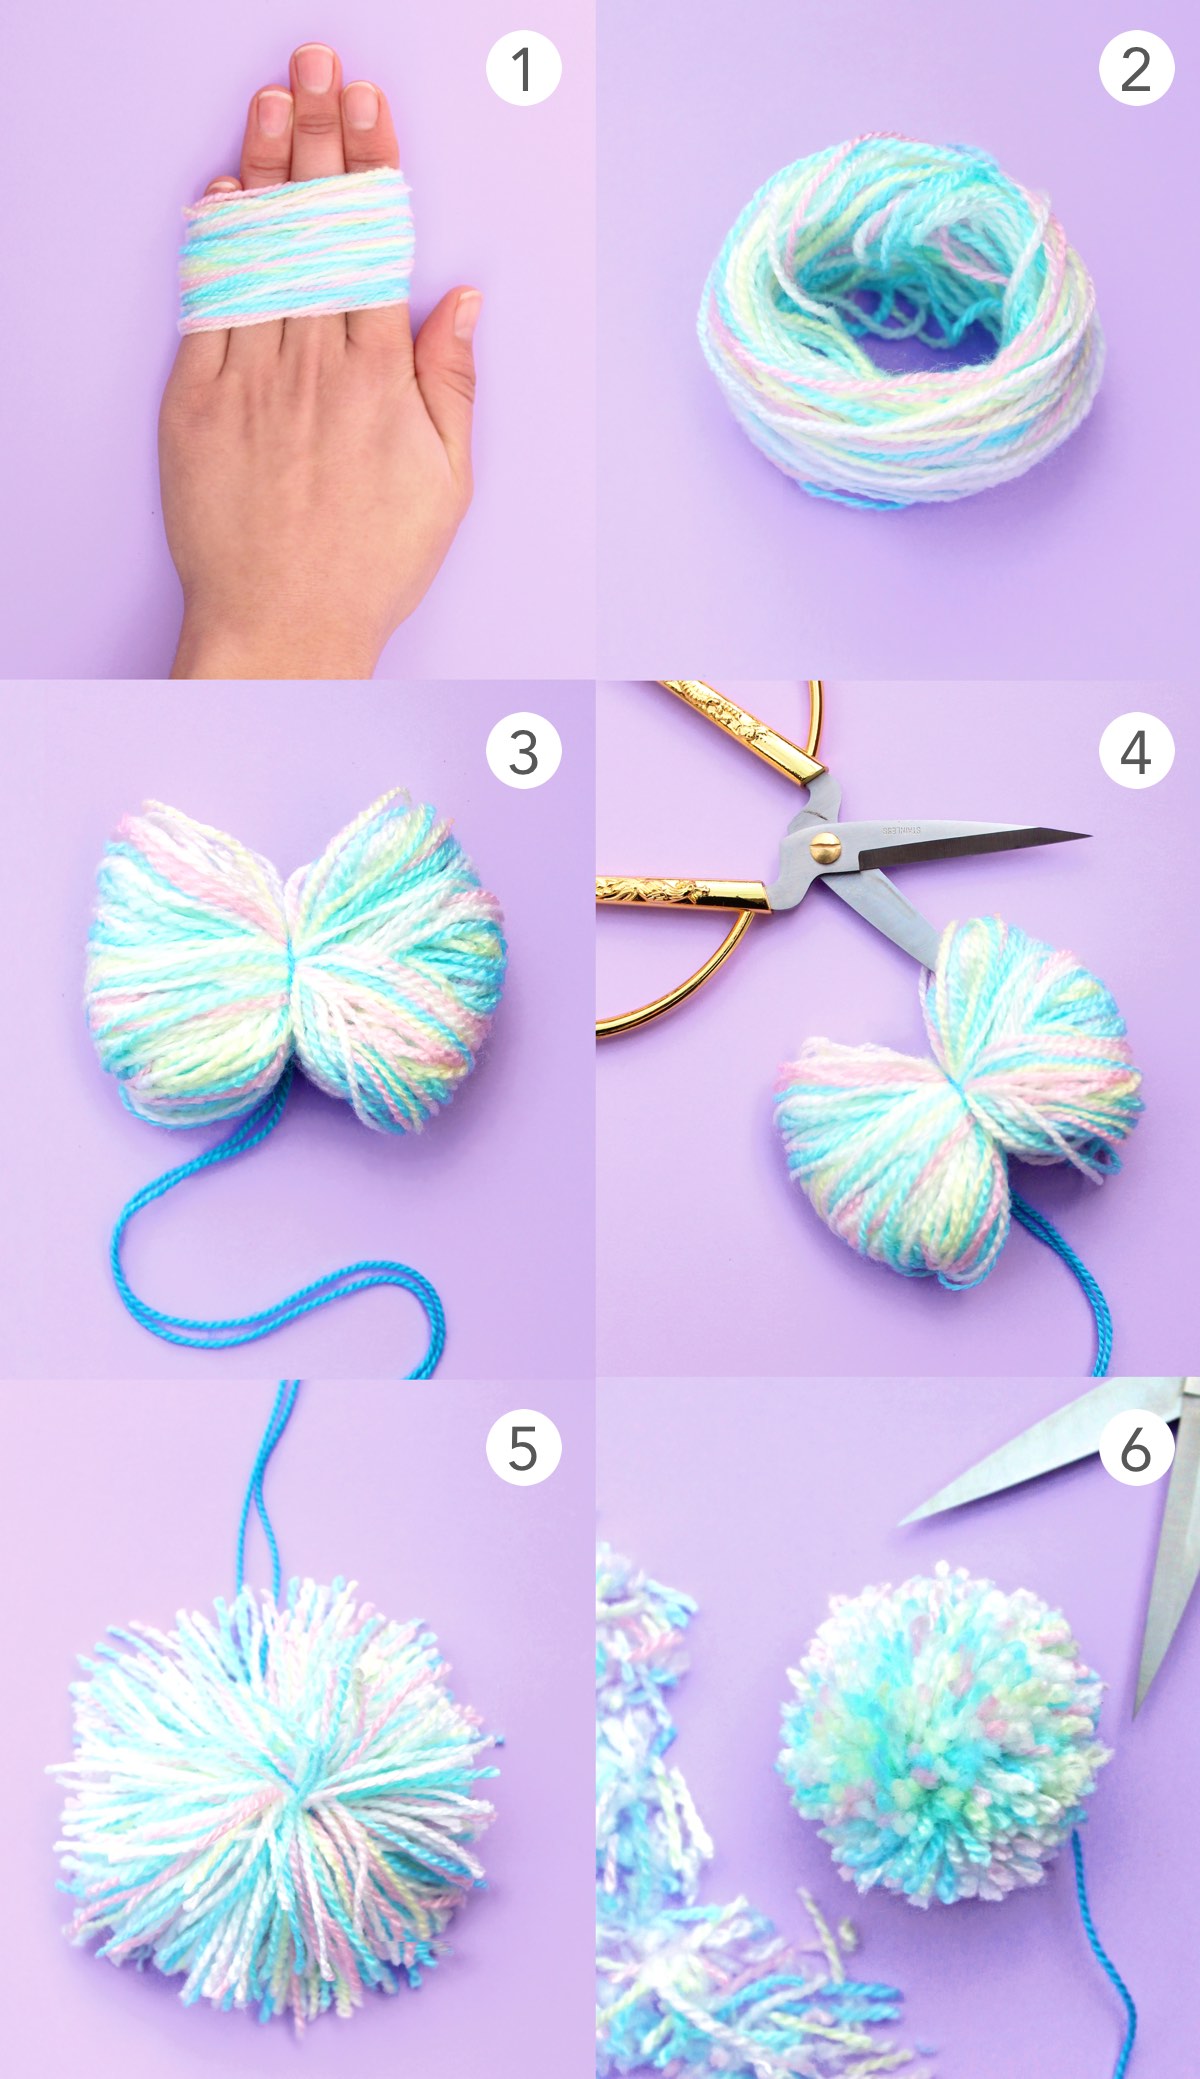 How to make a pom-pom for art activities, decorations and crafts •  Happythought